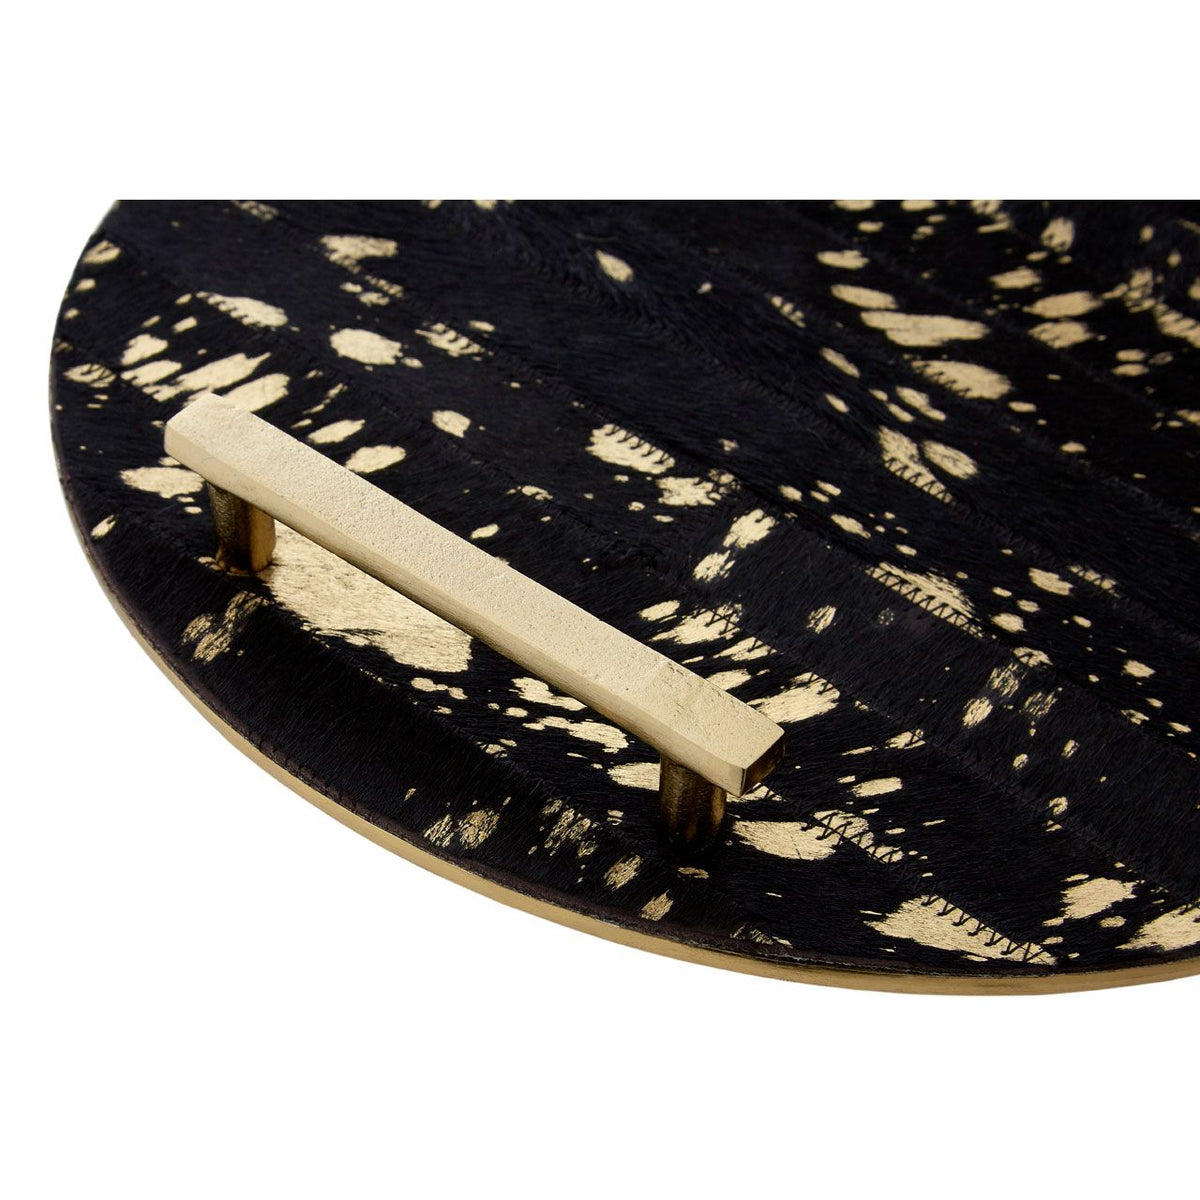 Bowerbird Cowhide Round Tray 30cm with Gold Handles